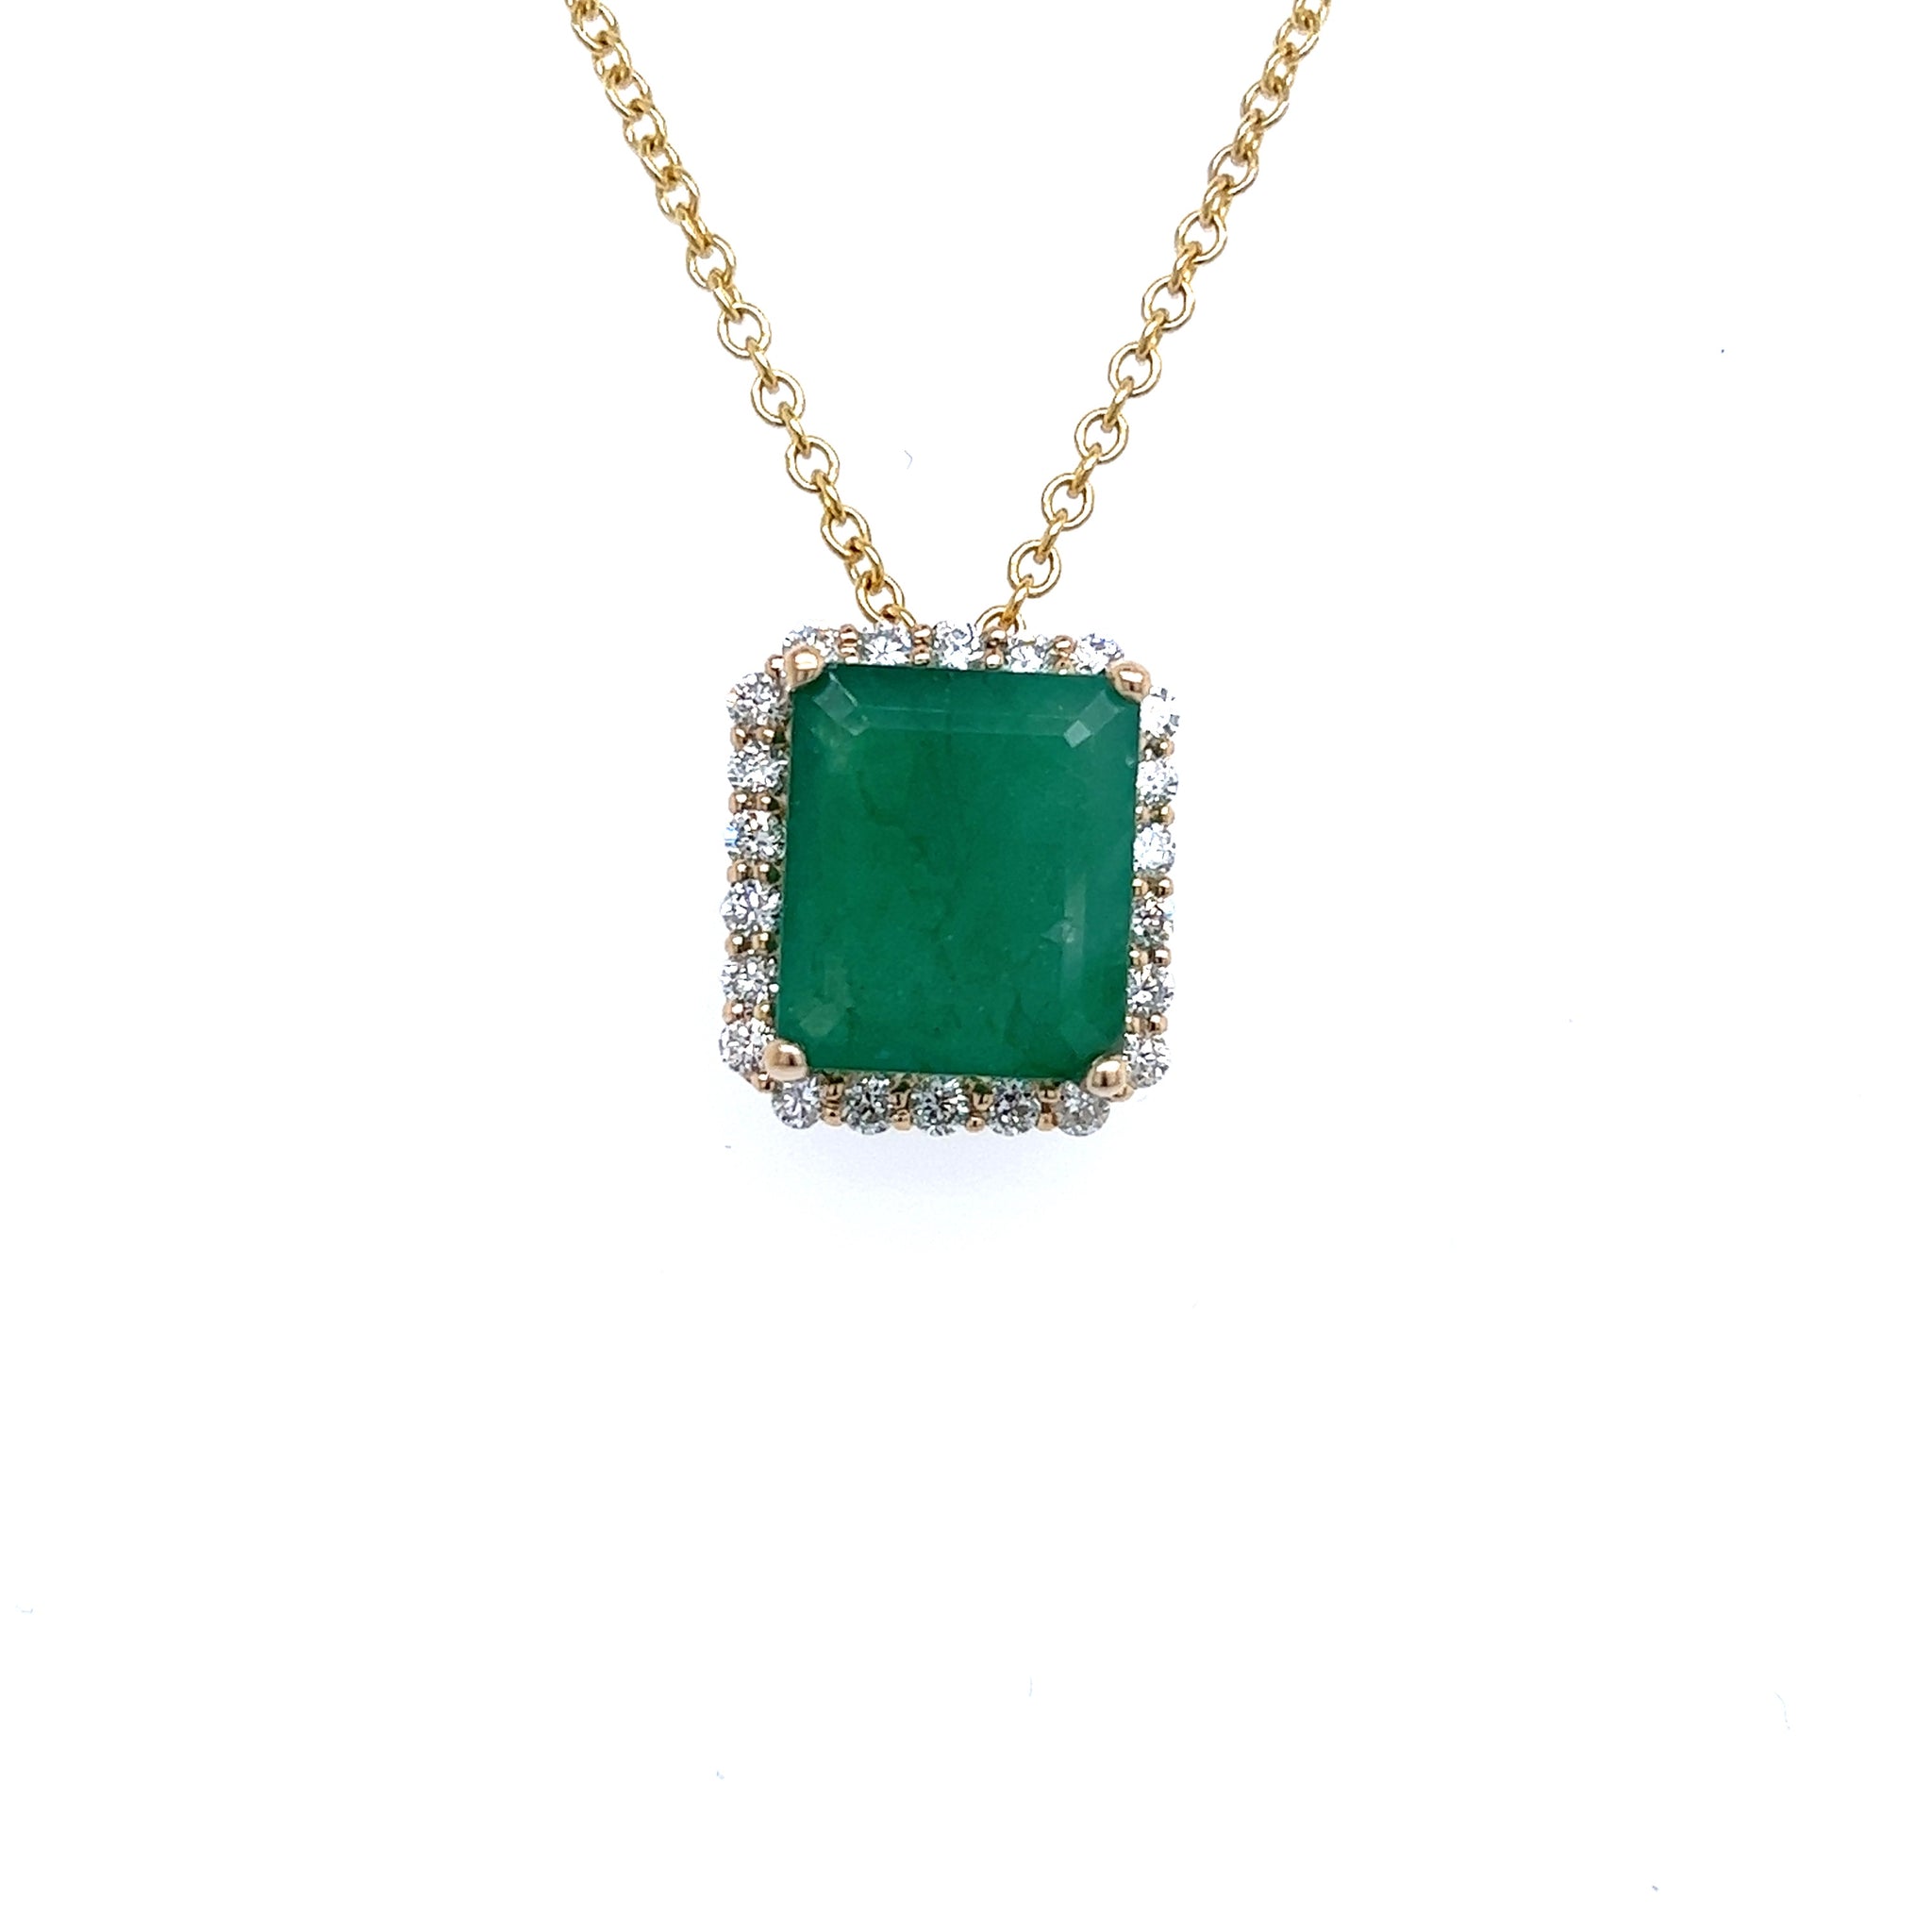 Natural Emerald Diamond Pendant Necklace 17" 14k Yellow Gold 5.05 TCW Certified $6,950 215627